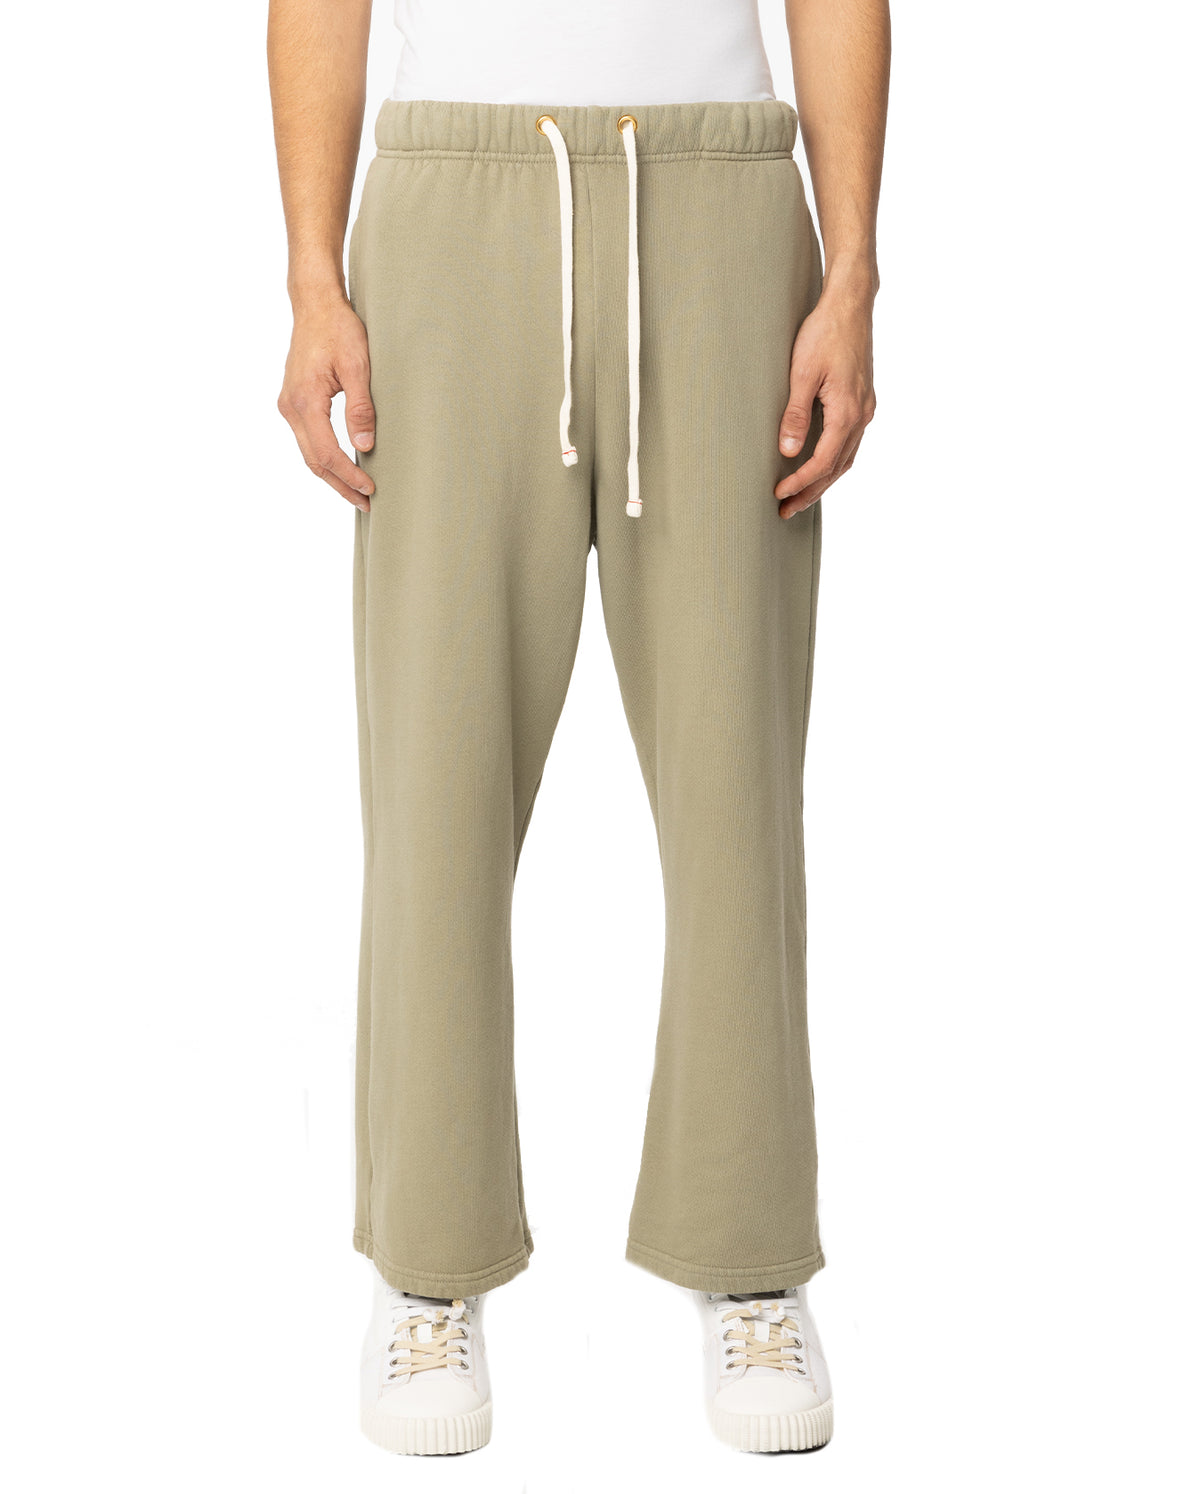 Cropped Relax Pant - Citron Sage